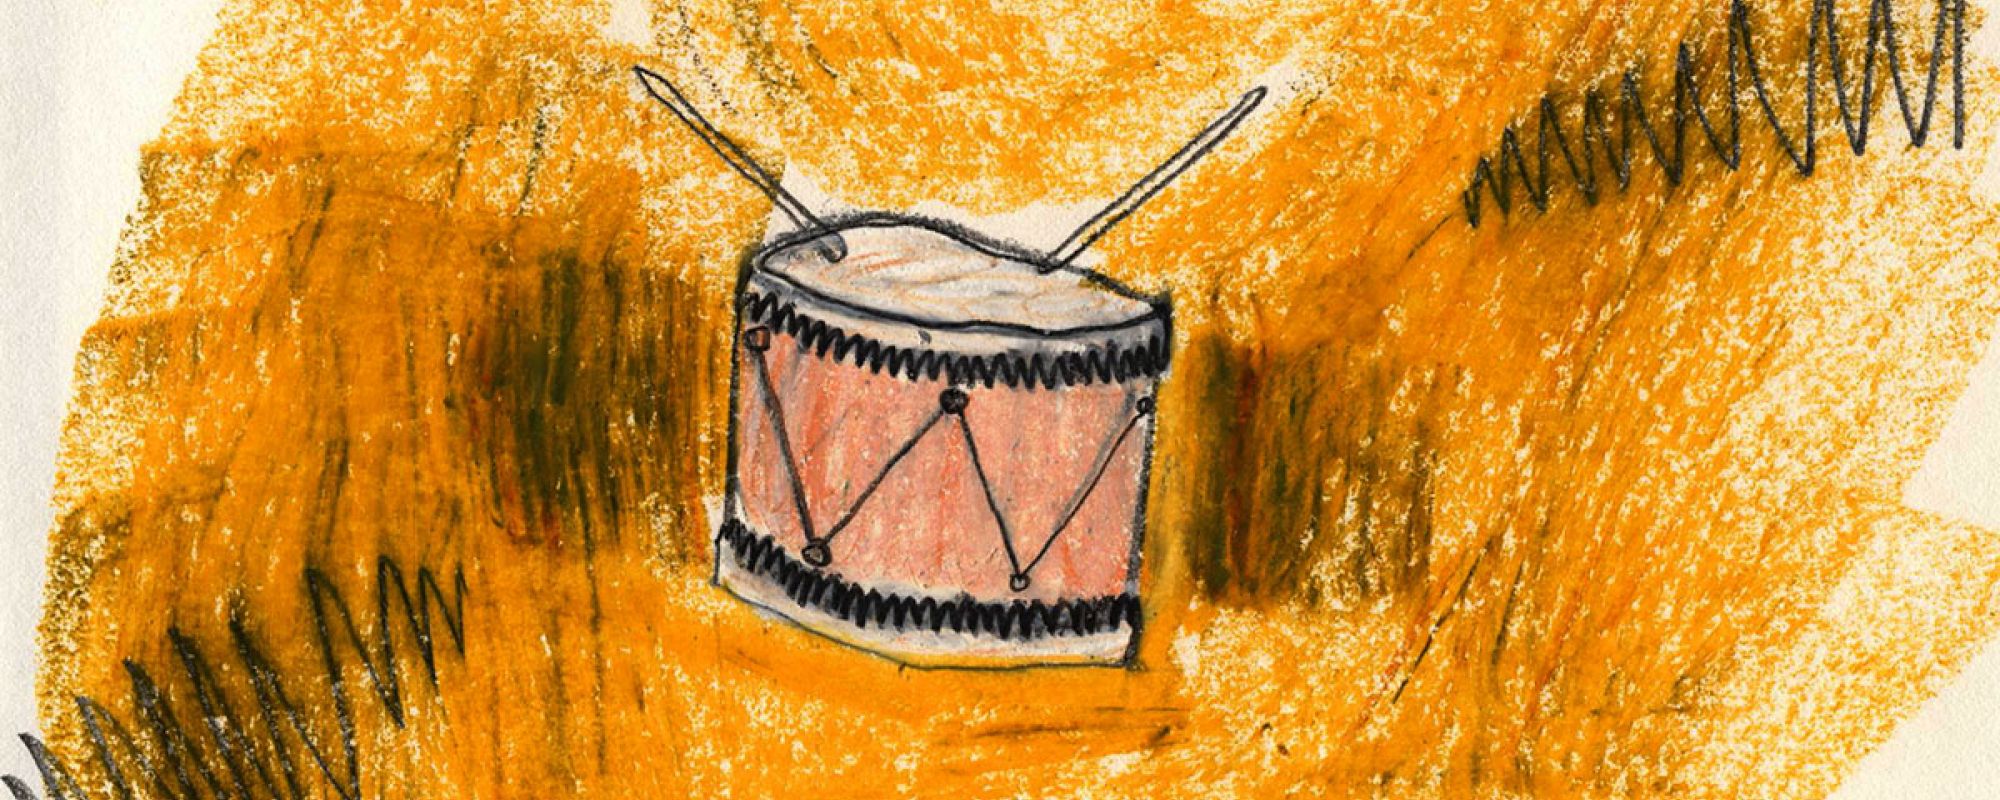 A hand-drawn photo of a drum on an orange background